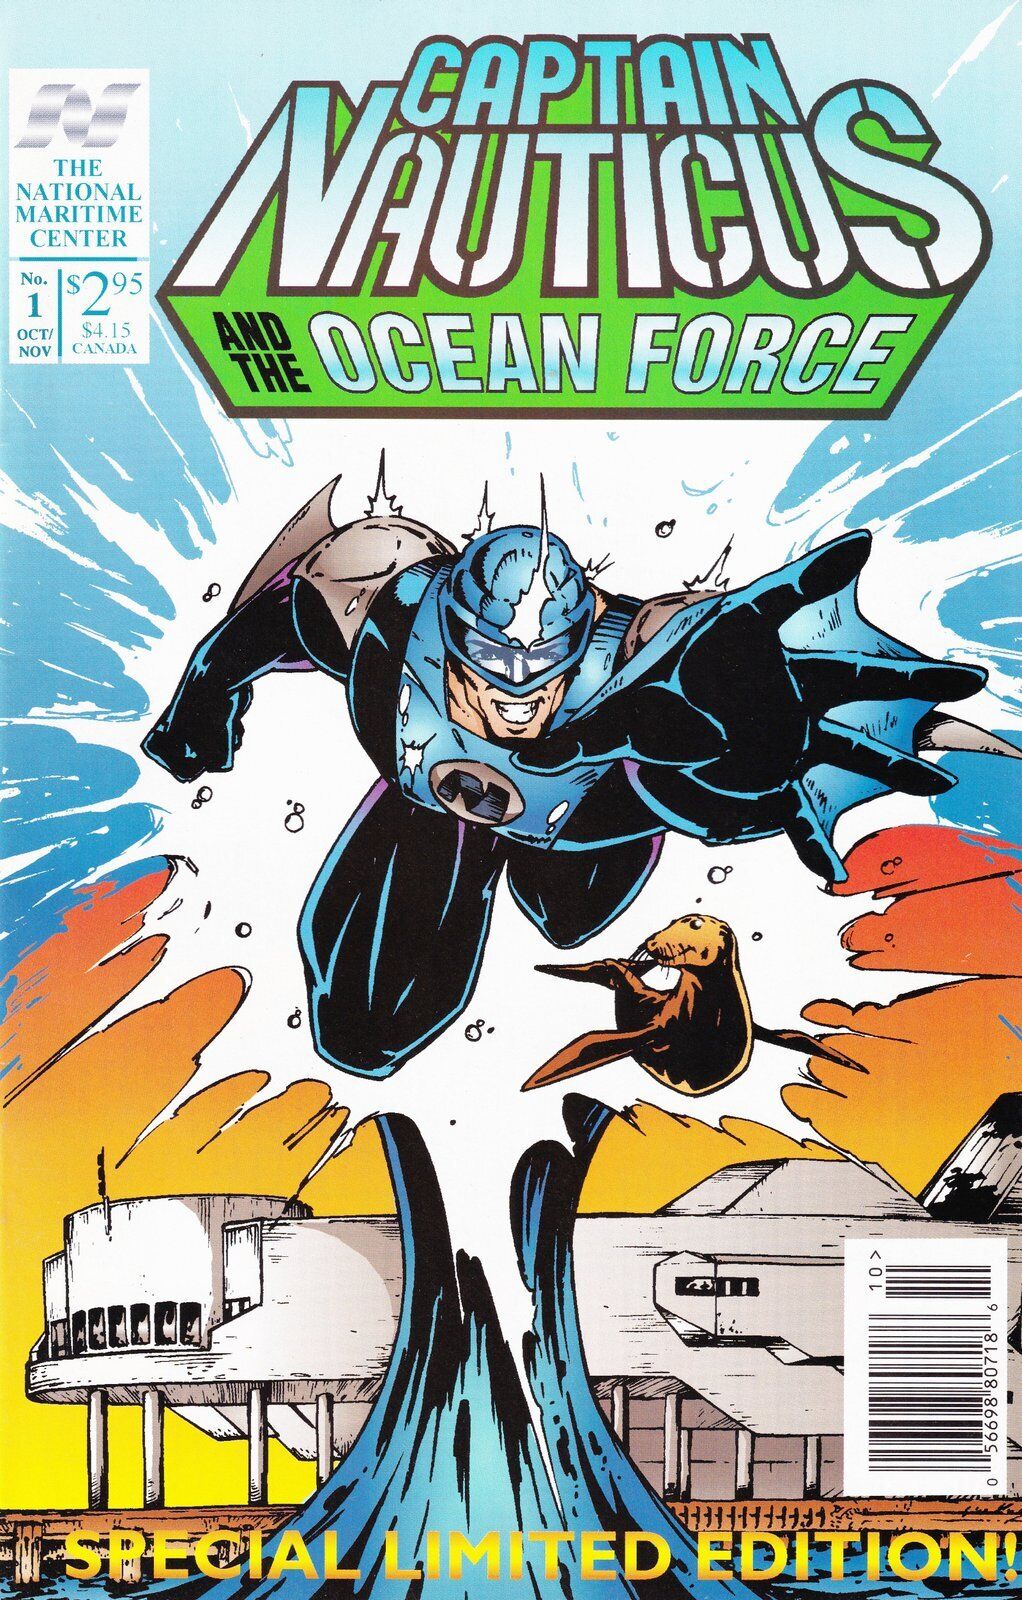 Captain Nauticus and the Ocean Force #1 Newsstand Cover (1994-1995)